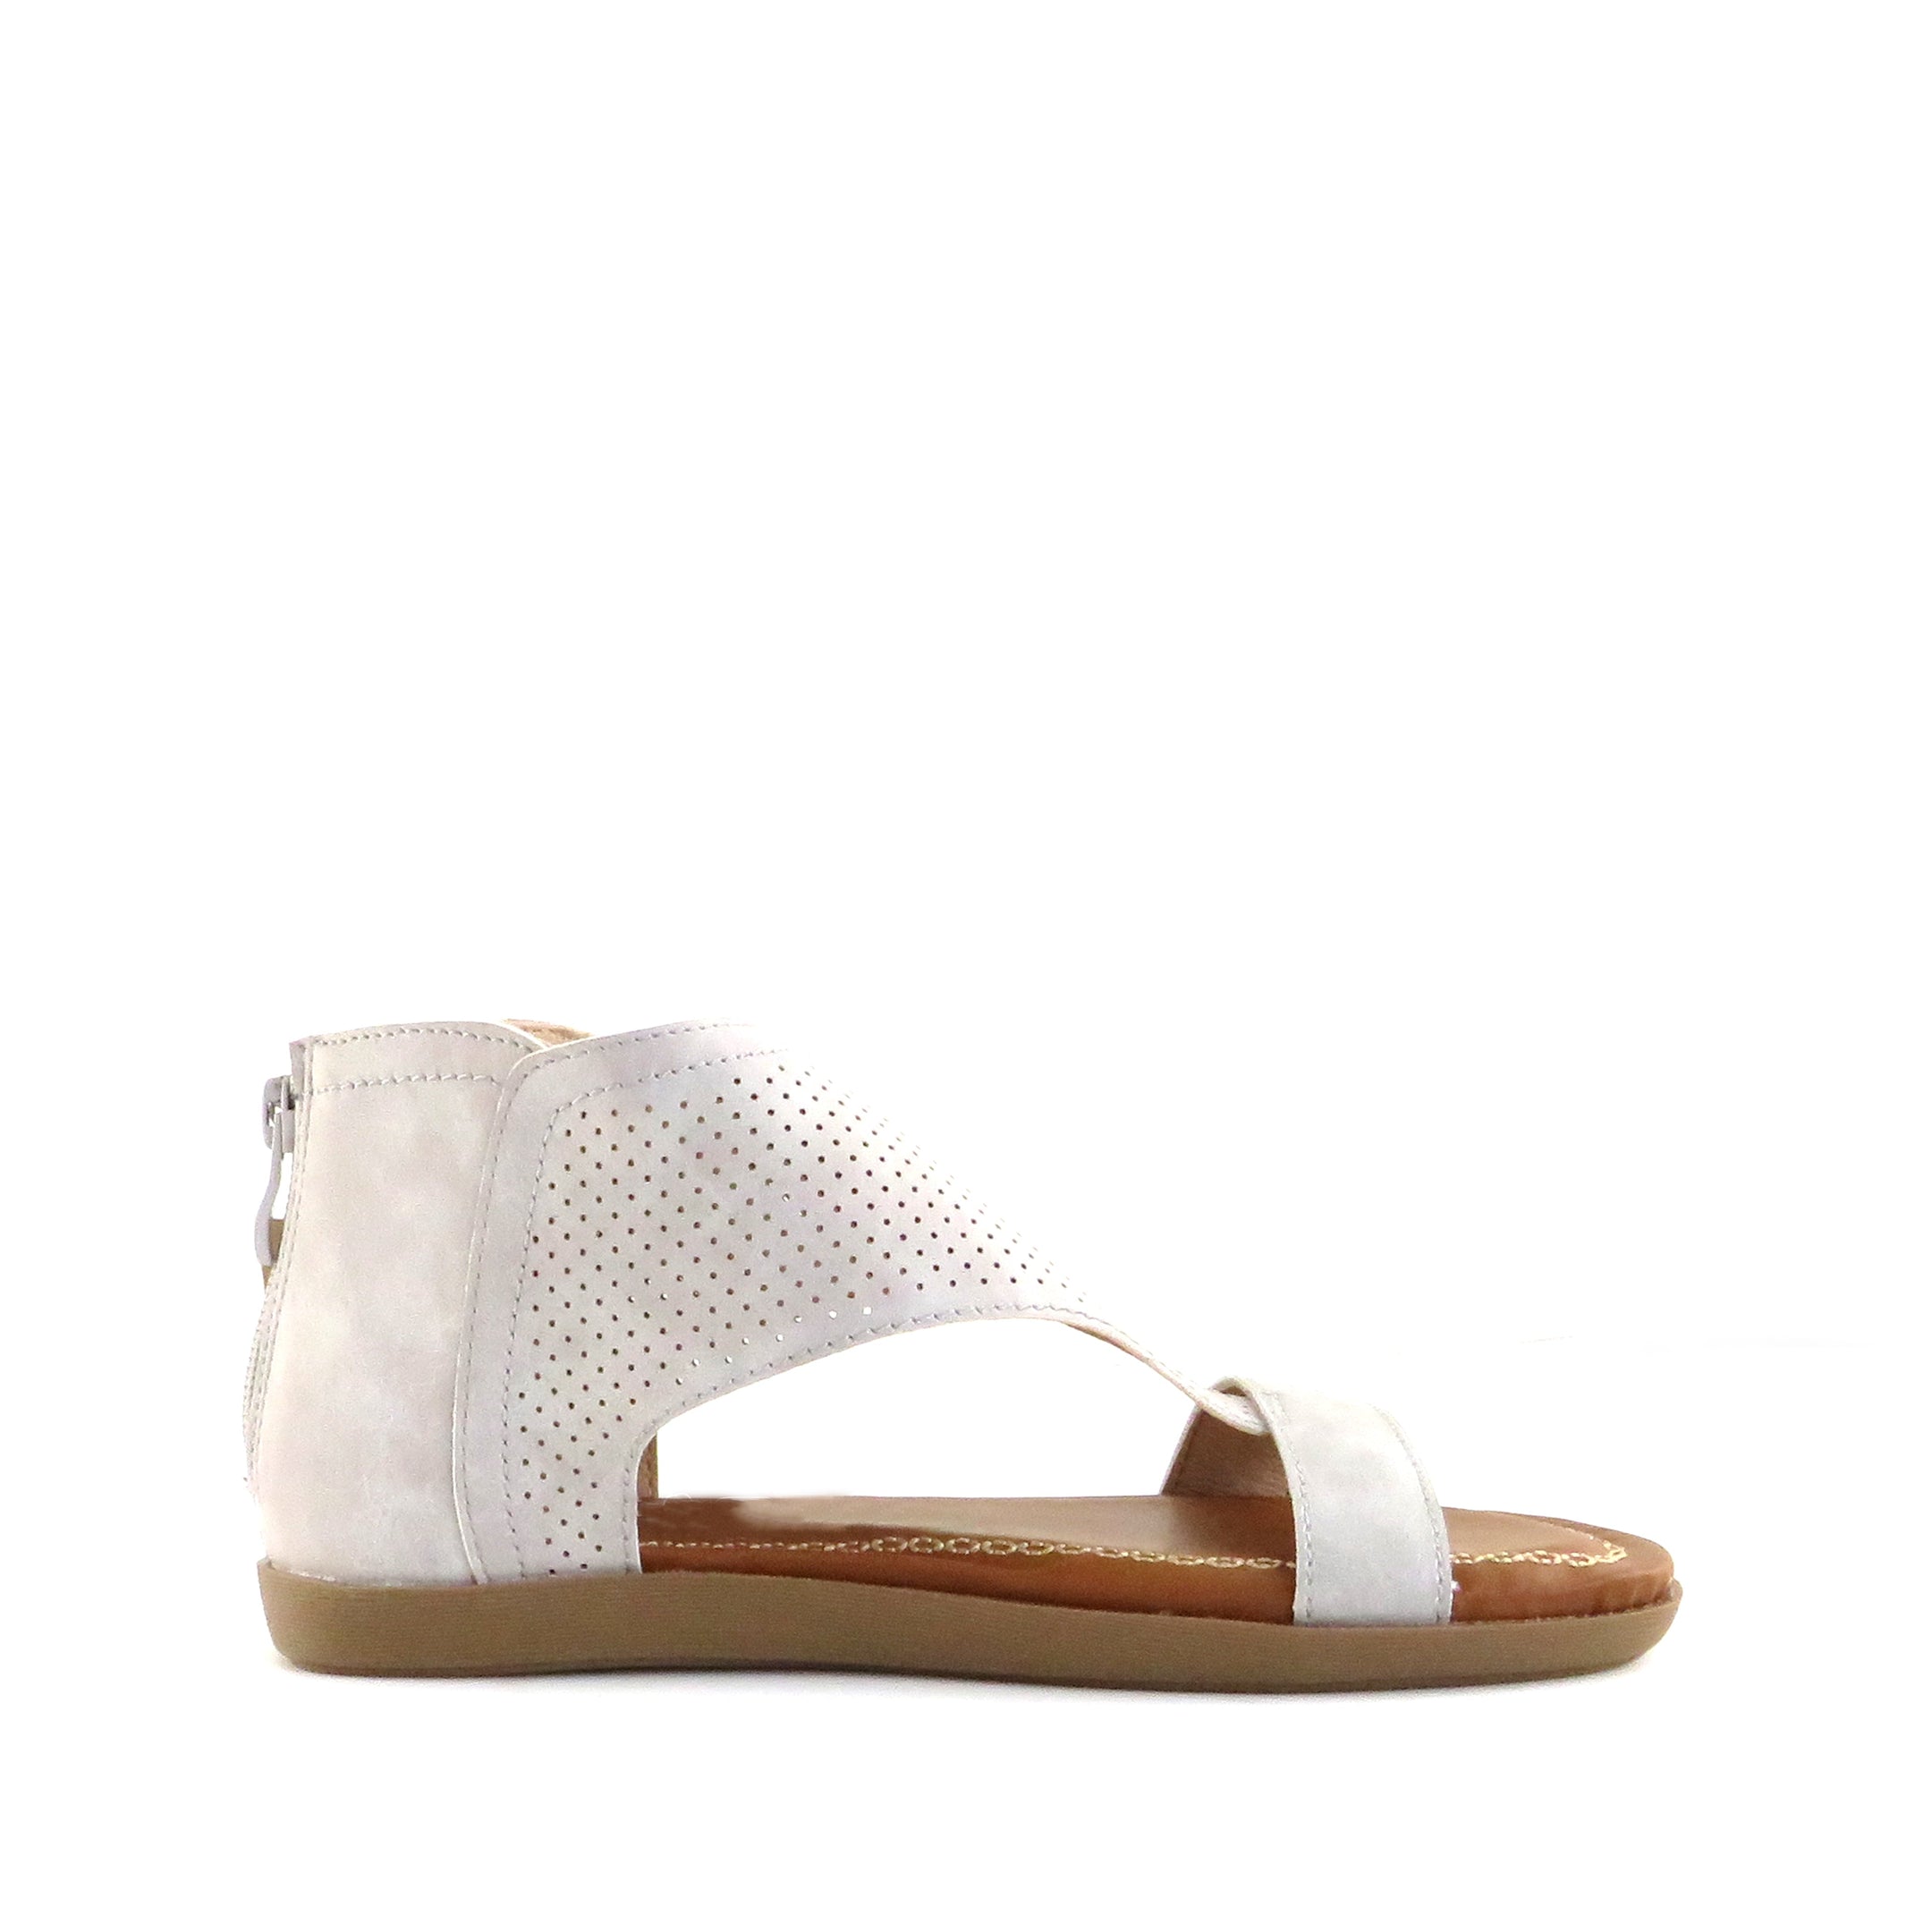 Buy Women's Coop Stone Perforated Sandal by Nest Shoes